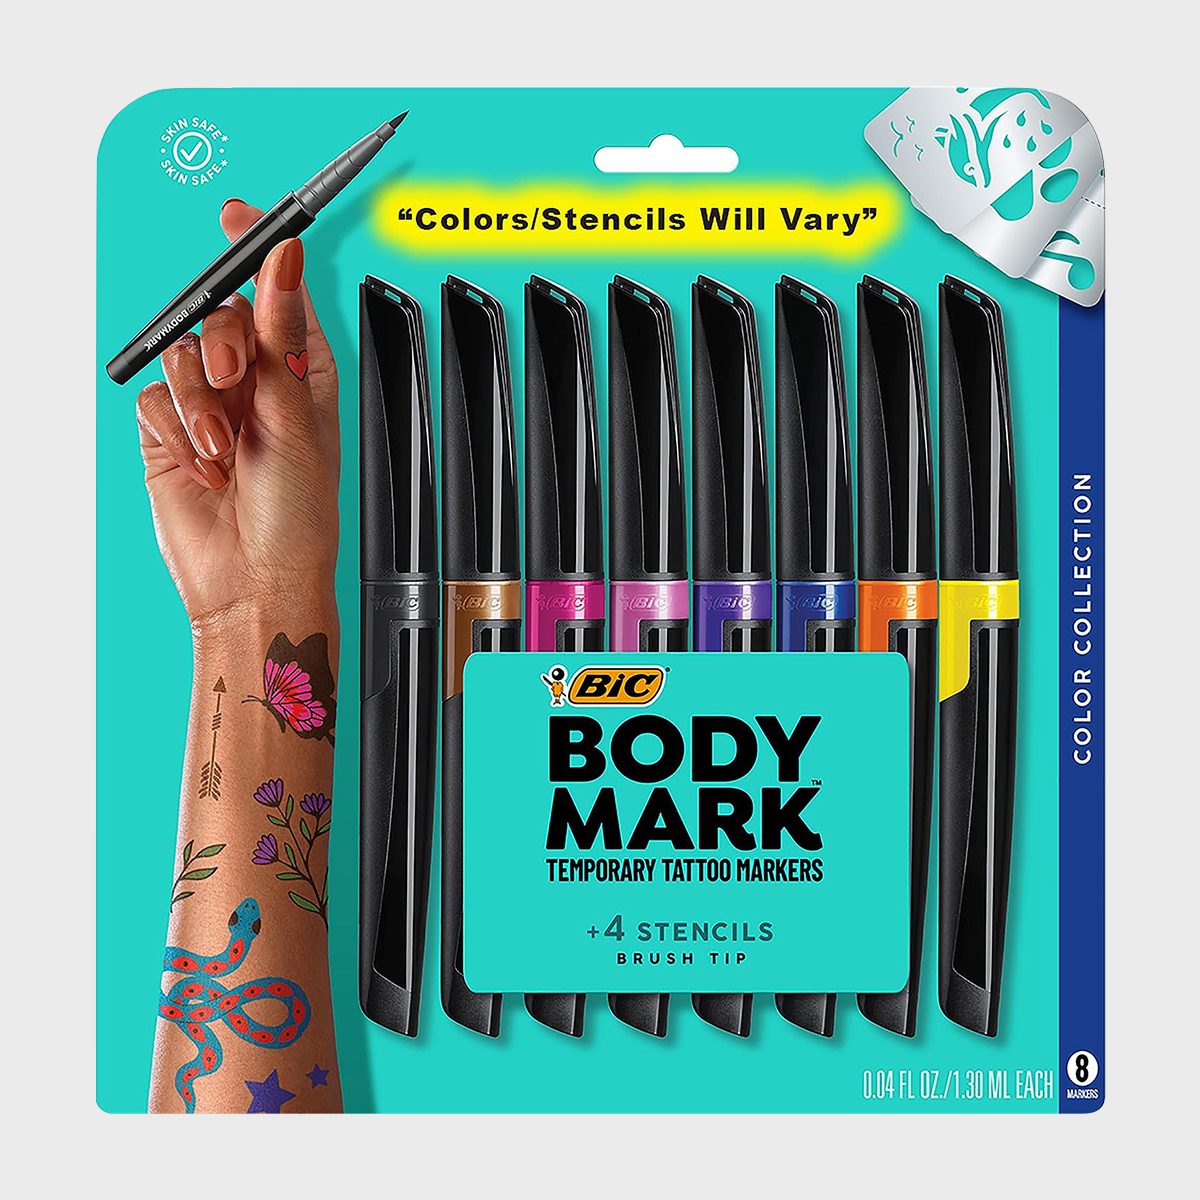 <p>Gifts for girls just got cooler with these temporary tattoos made with <a href="https://www.amazon.com/BIC-BodyMark-Temporary-Assorted-8-Count/dp/B07MMZ8Y1V" rel="noopener noreferrer">skin-safe markers</a>. She can draw freehand or use the included tattoo stencils as guides to turn herself into a work of art. These markers use temporary ink that is specifically made for skin, comply with all cosmetic regulations and come off with makeup remover. Talk about a cool <a href="https://www.rd.com/list/stocking-stuffers-for-teens/" rel="noopener noreferrer">stocking stuffer for teens</a>!</p> <p class="listicle-page__cta-button-shop"><a class="shop-btn" href="https://www.amazon.com/BIC-BodyMark-Temporary-Assorted-8-Count/dp/B07MMZ8Y1V/">Shop Now</a></p>